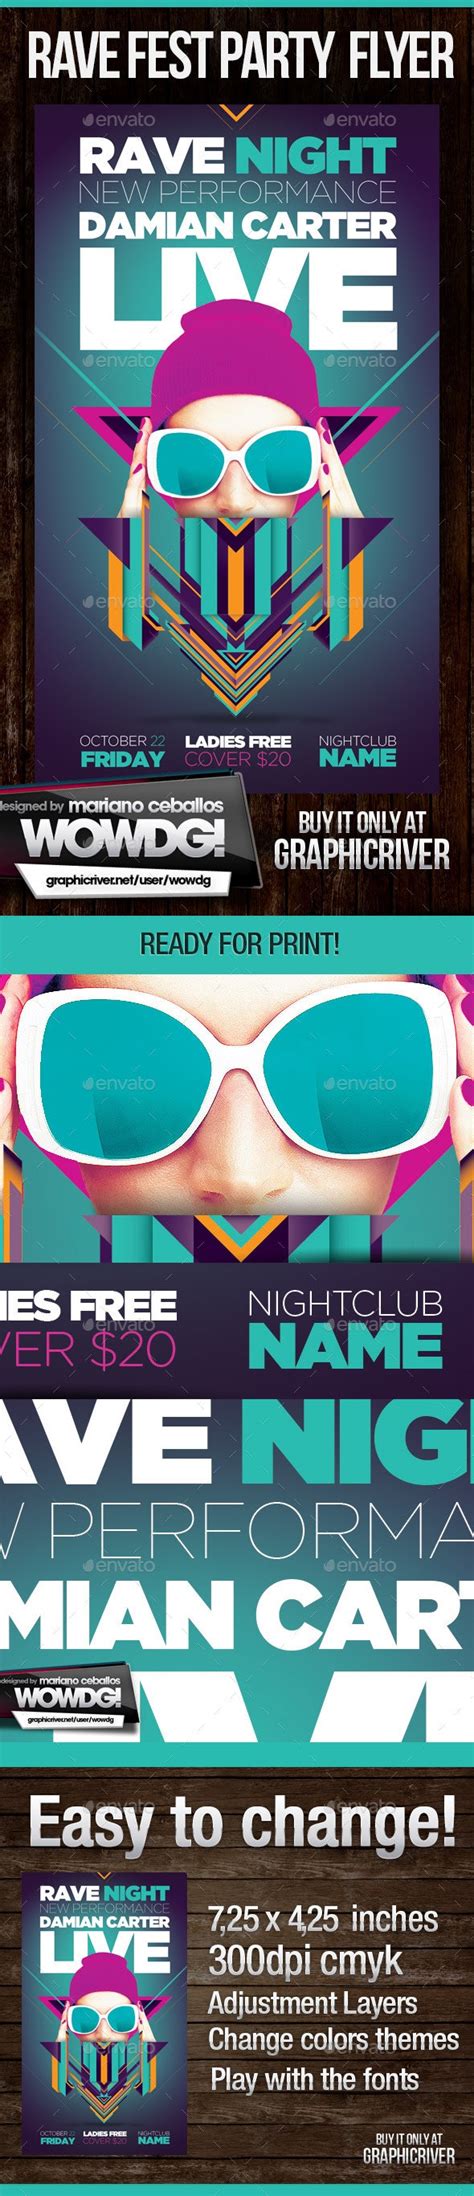 Rave Party Flyer Print Templates Graphicriver